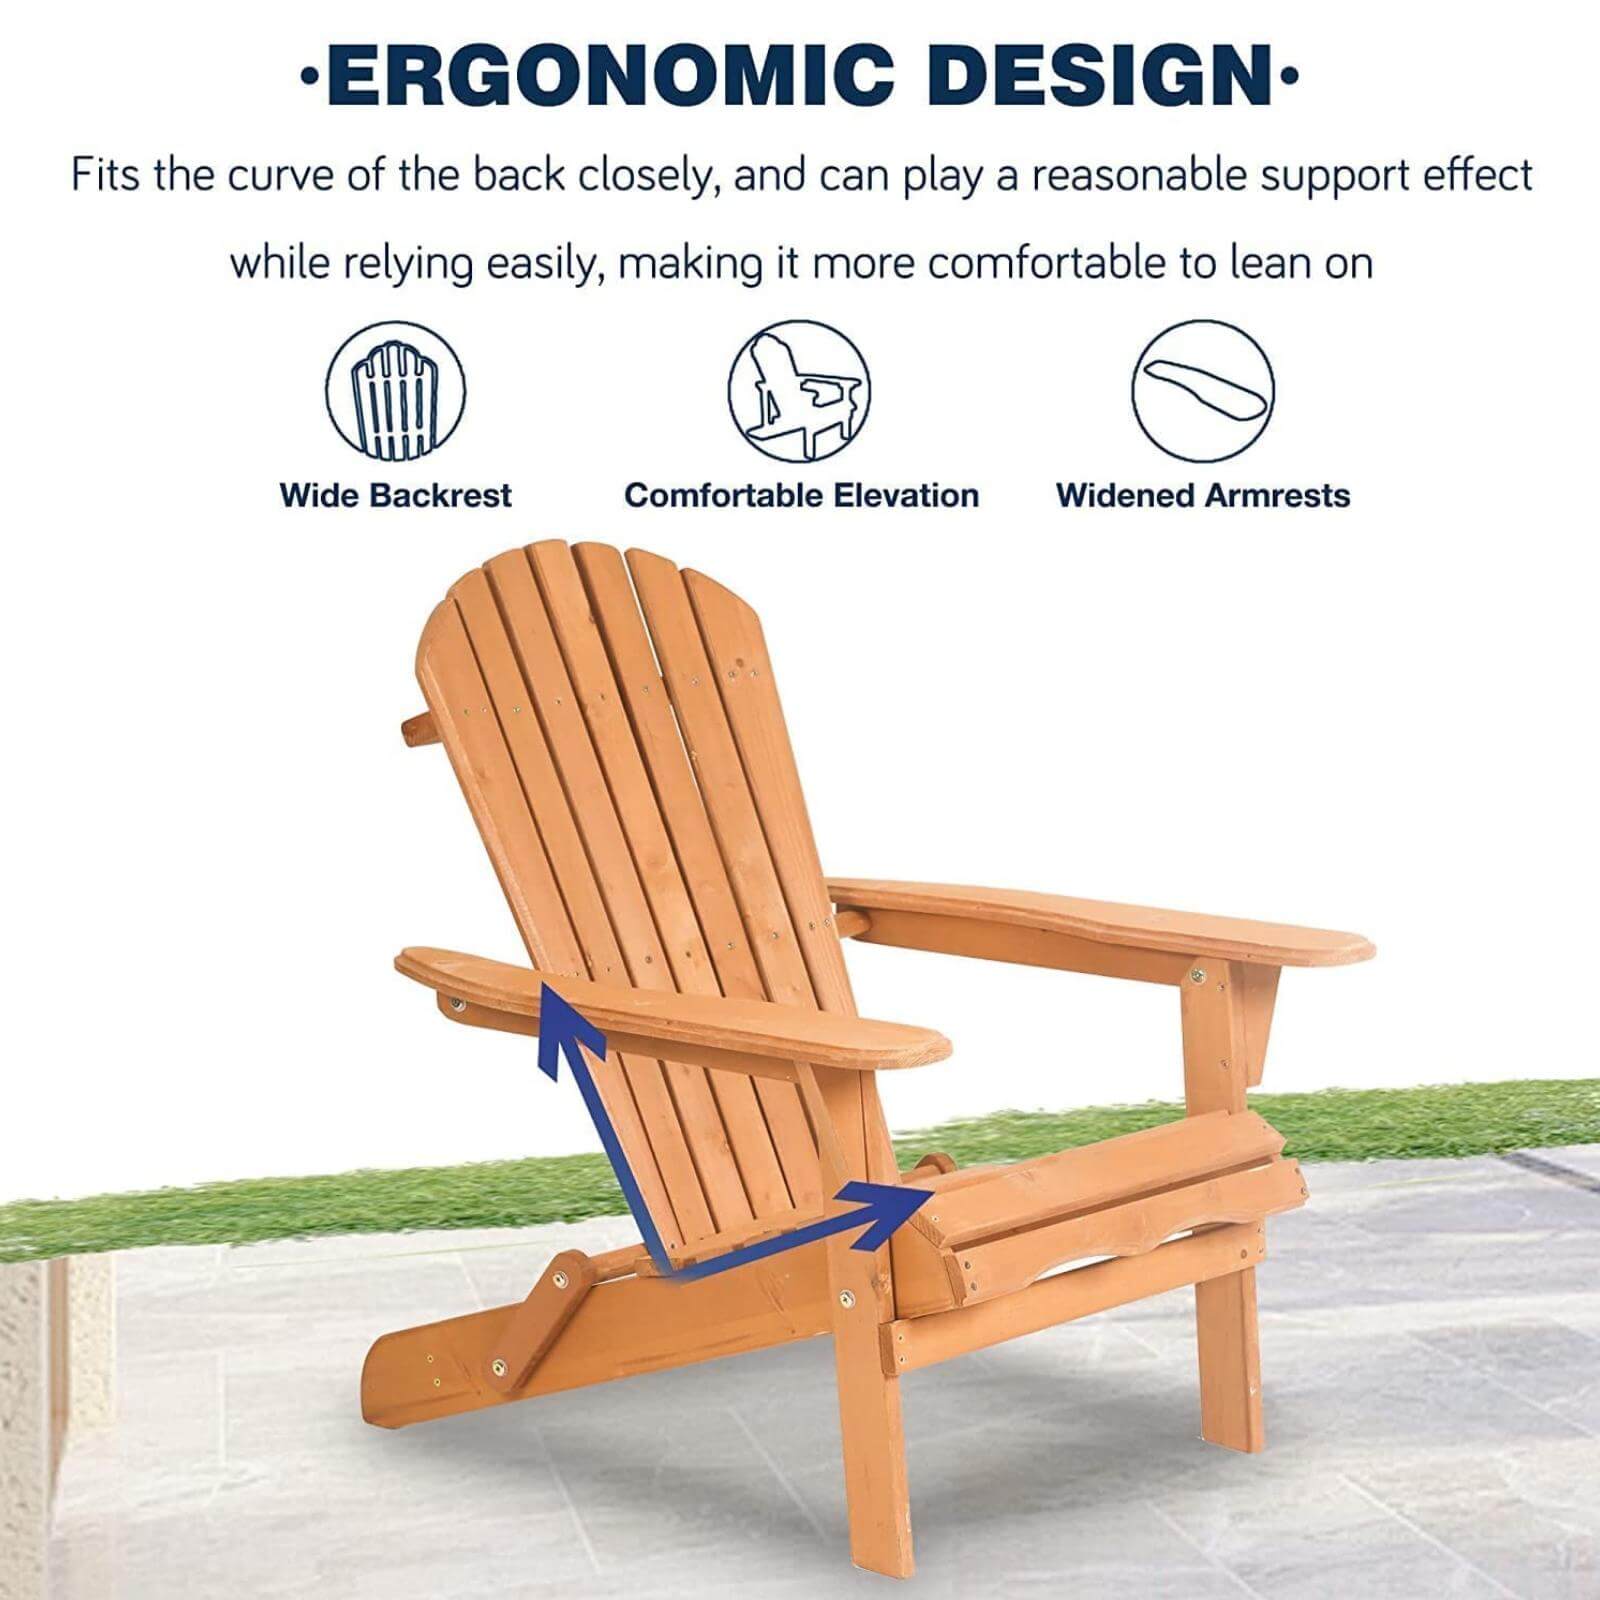 Adirondack Chair Set of 2 Folding Outdoor Patio Chairs All Weather Resistant Chair, Solid Wooden Accent Lounge Chairs w/Arms, Widely Used in Fire Pit Deck Garden Campfire Chairs, Natural, Yellow - image 4 of 8